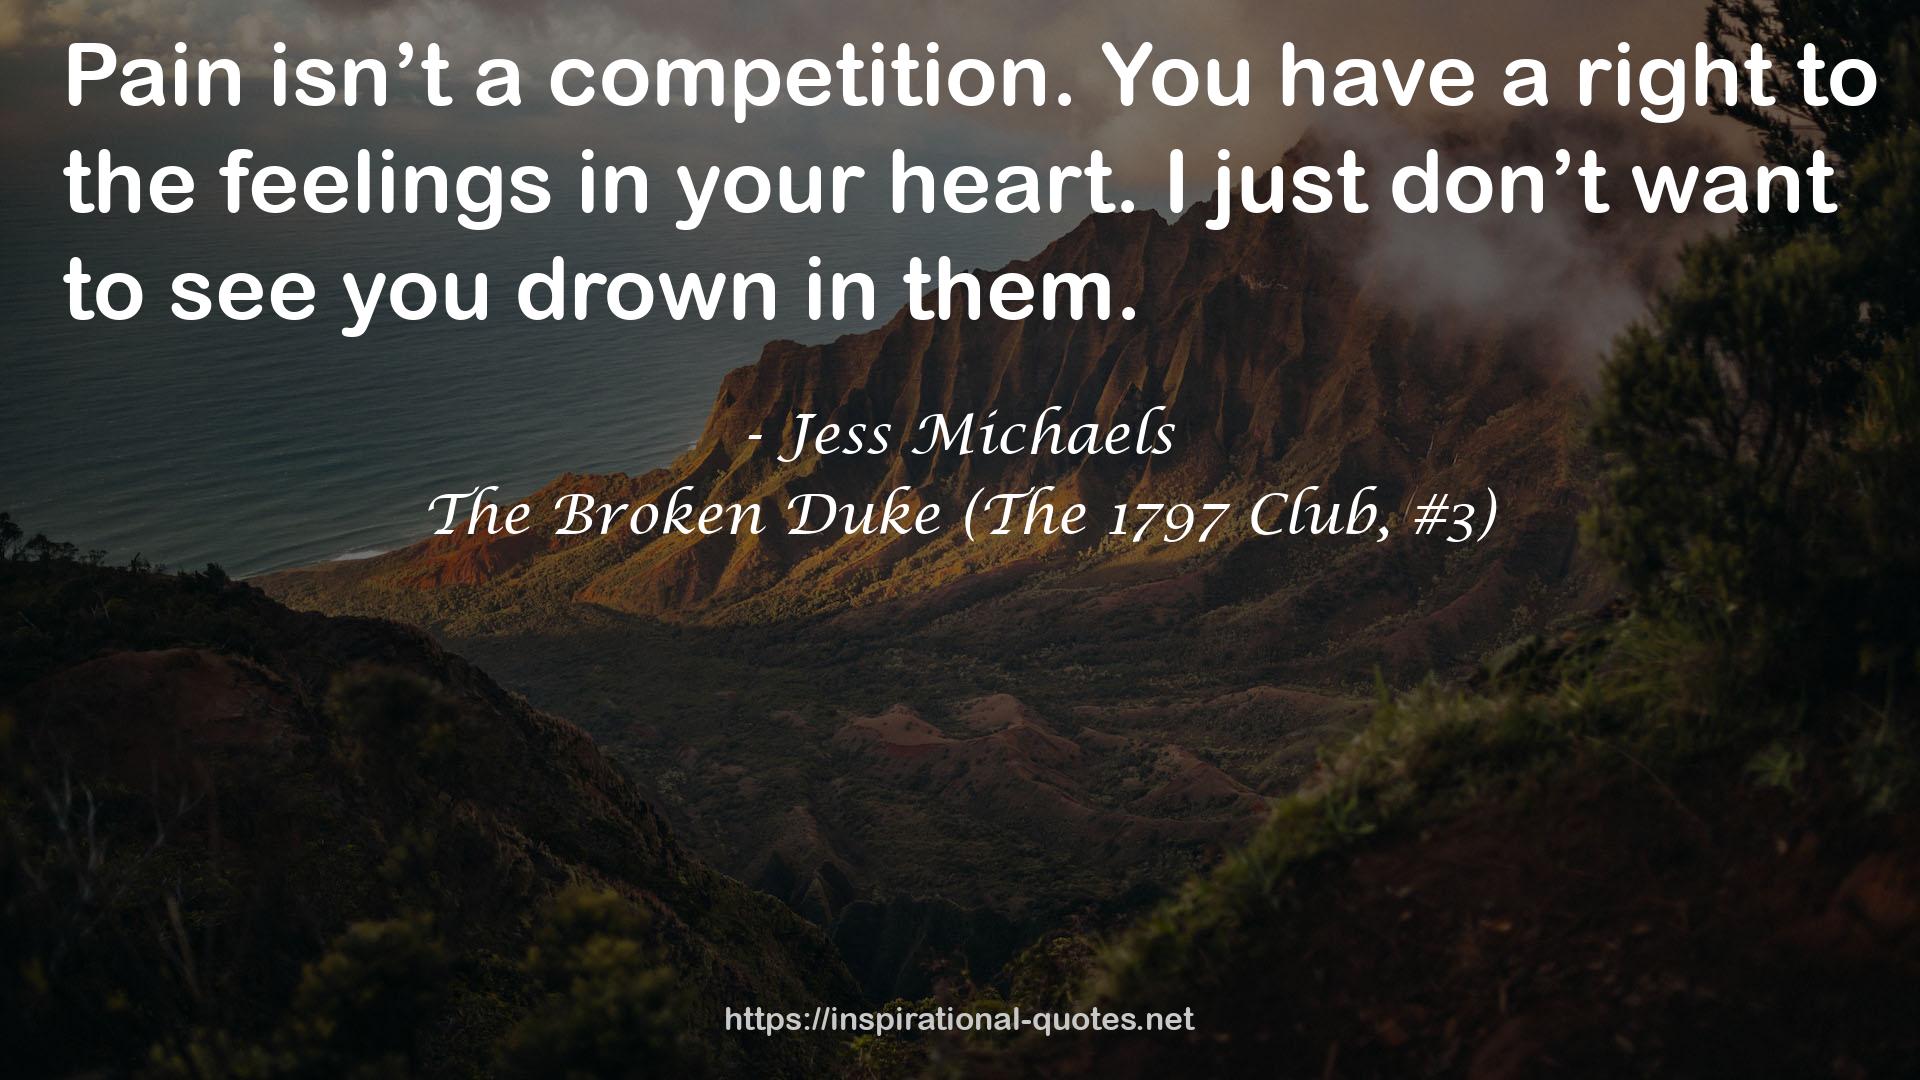 The Broken Duke (The 1797 Club, #3) QUOTES